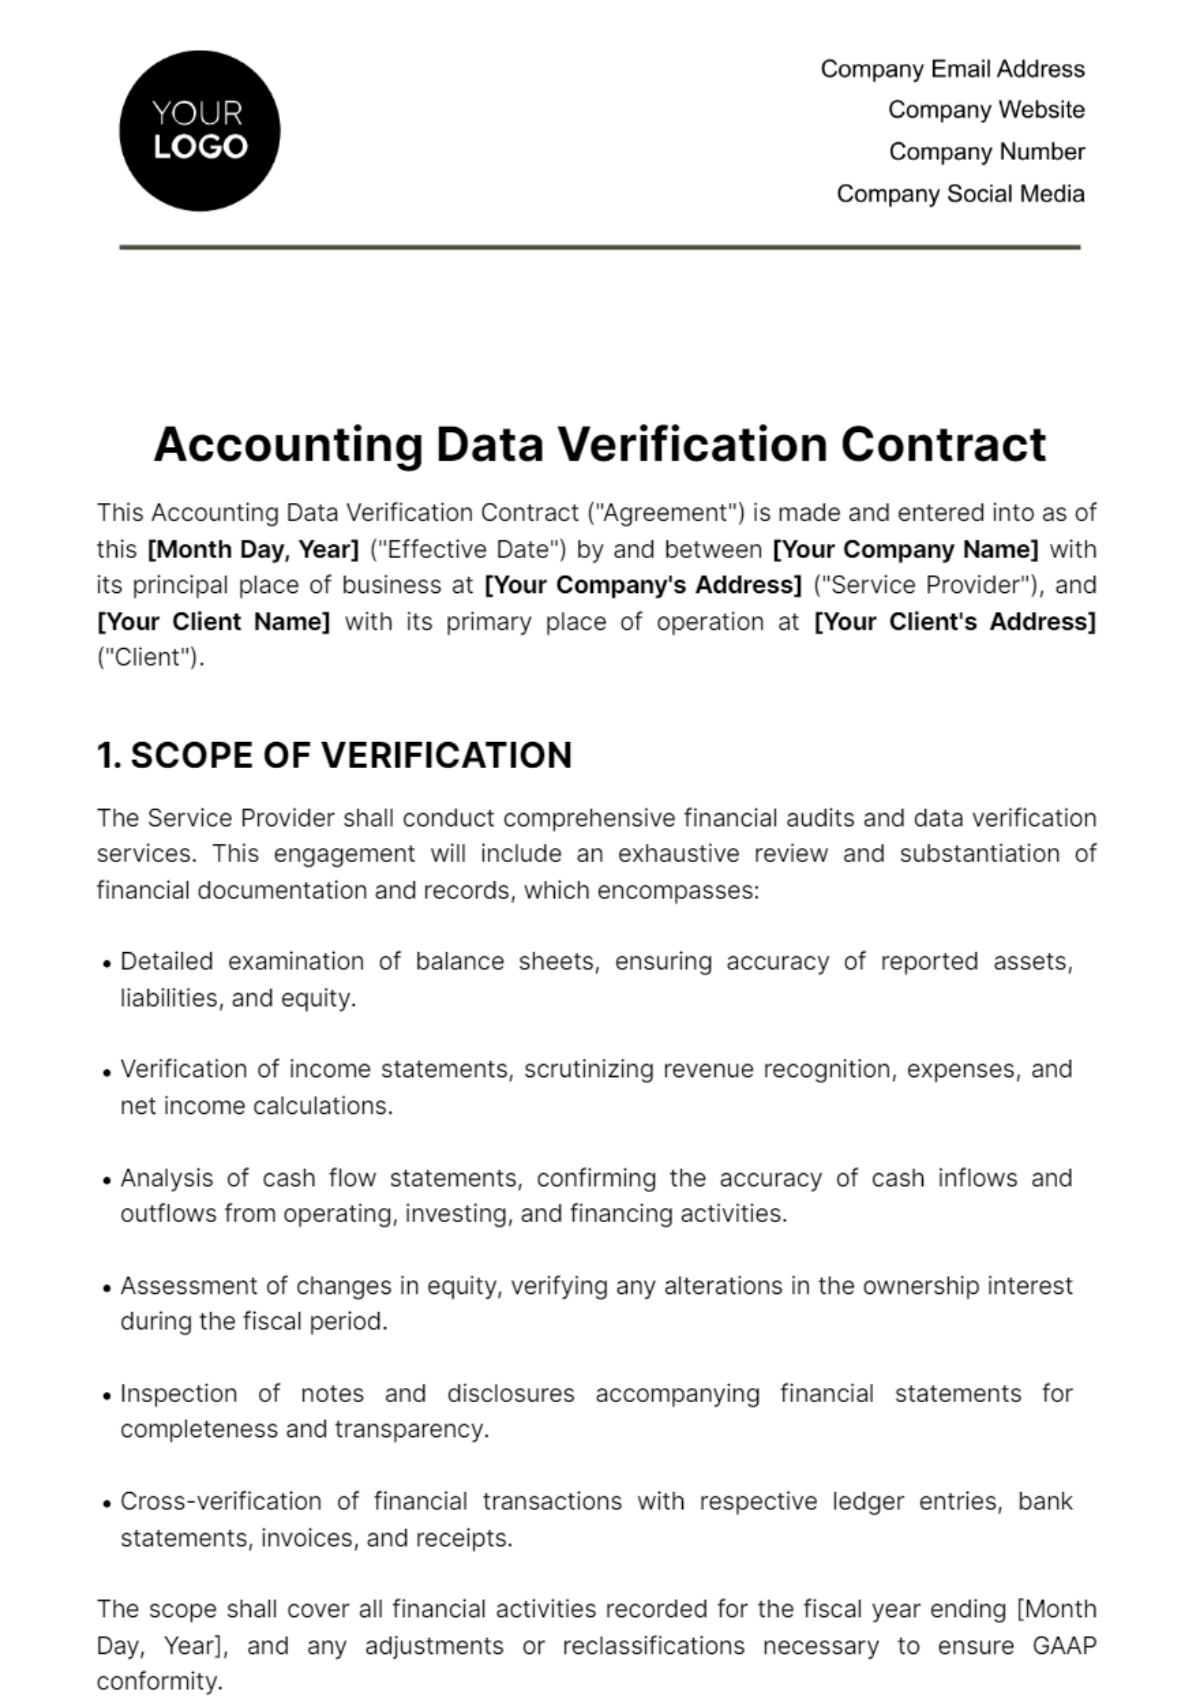 Free Accounting Data Verification Contract Template